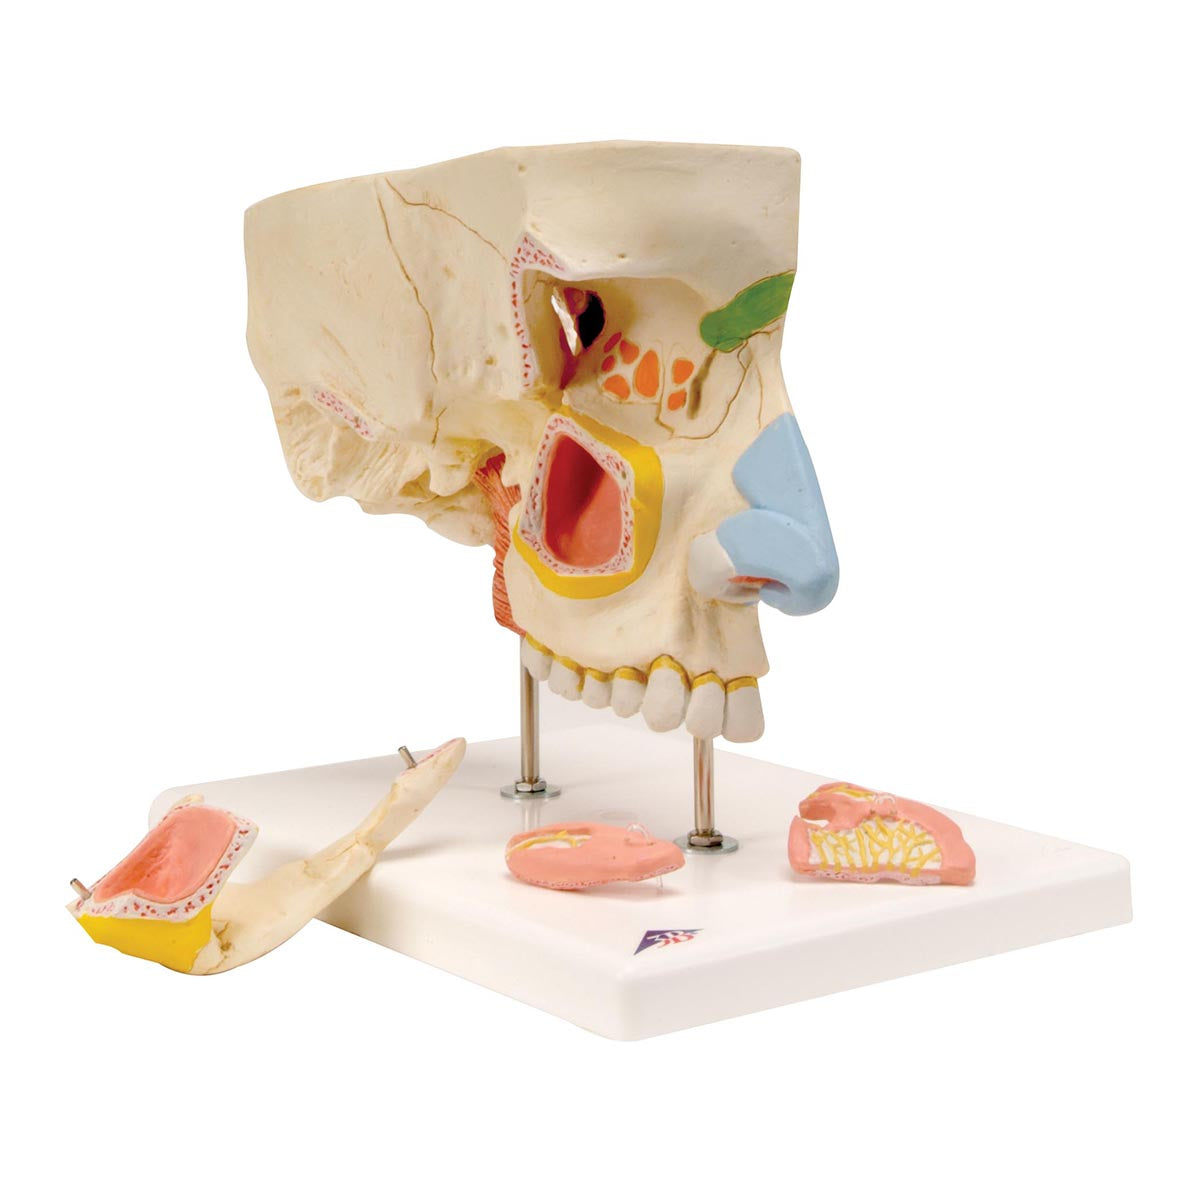 Enlarged and detailed model of the location of the 4 sinuses and much more. Can be separated into several parts